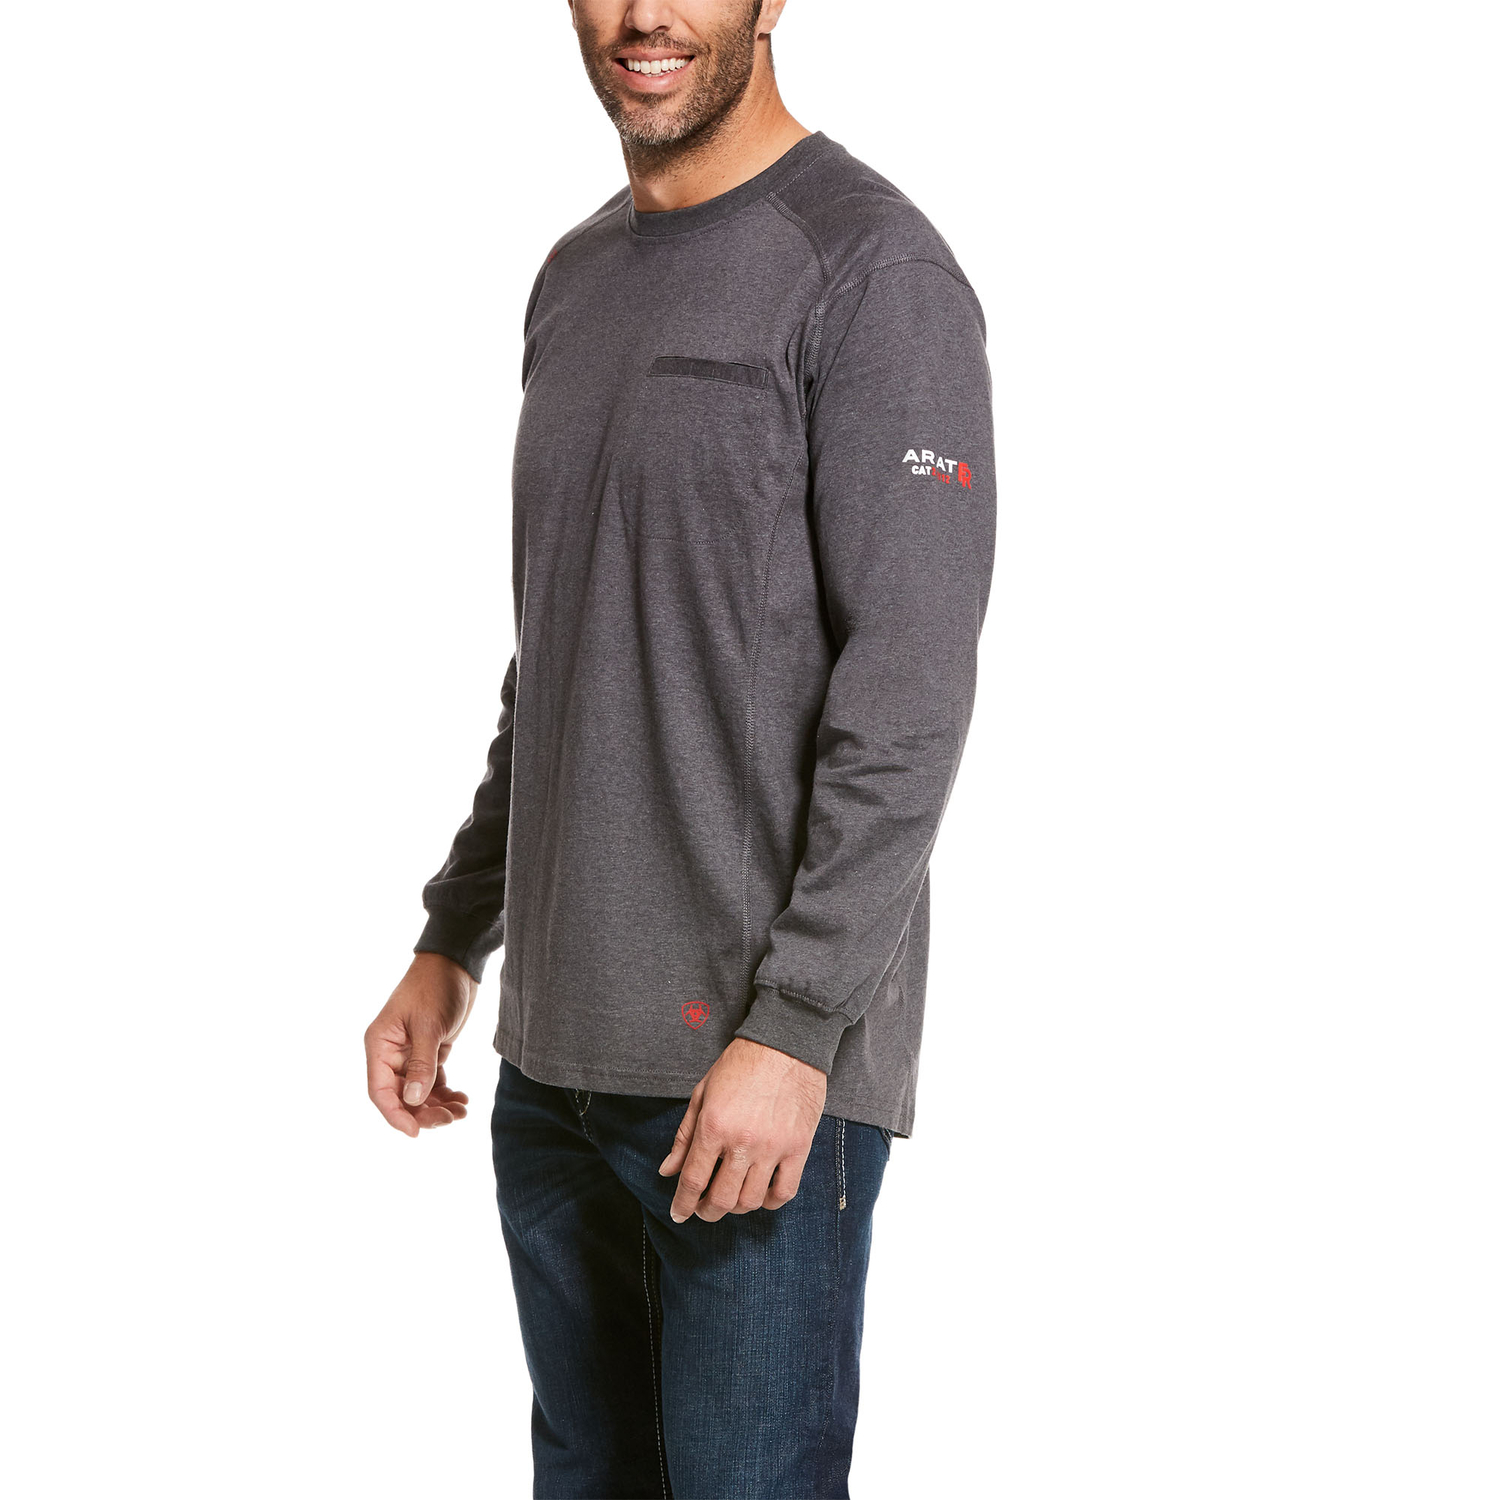 Ariat FR Air Crew T-Shirt in Charcoal Heather